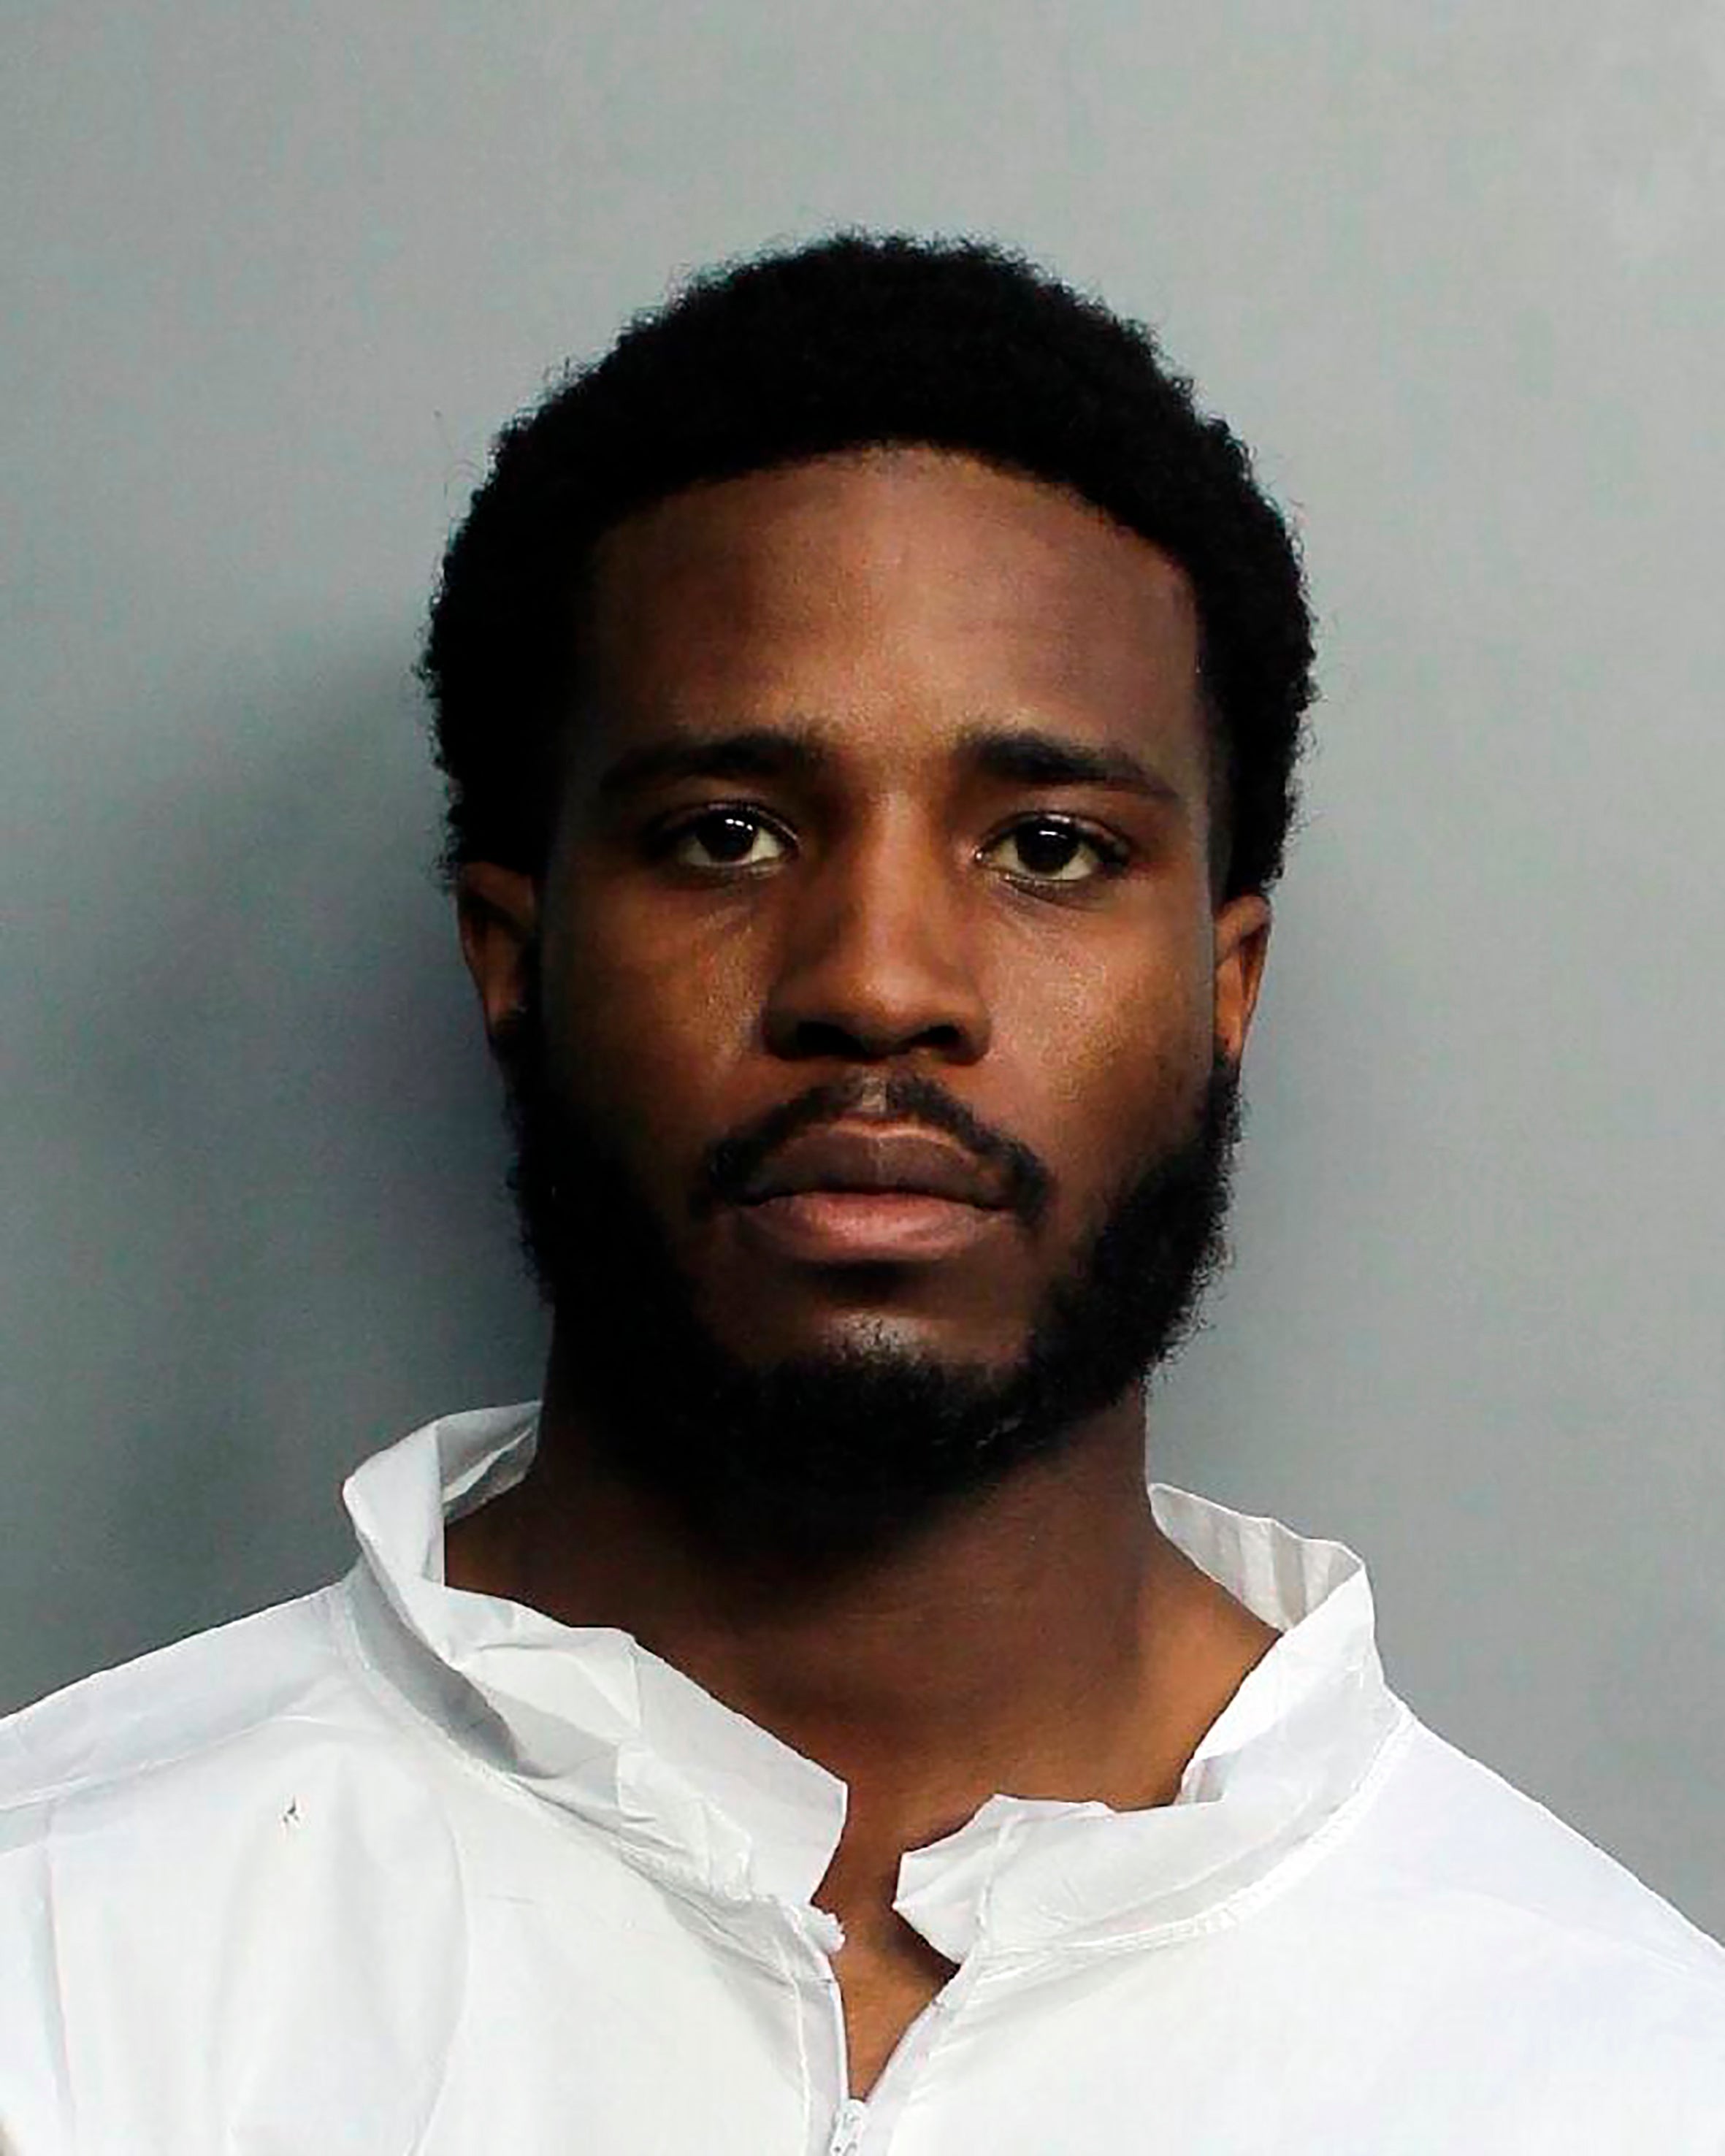 Tamarius Blair Davis, 22, has been charged with second-degree murder